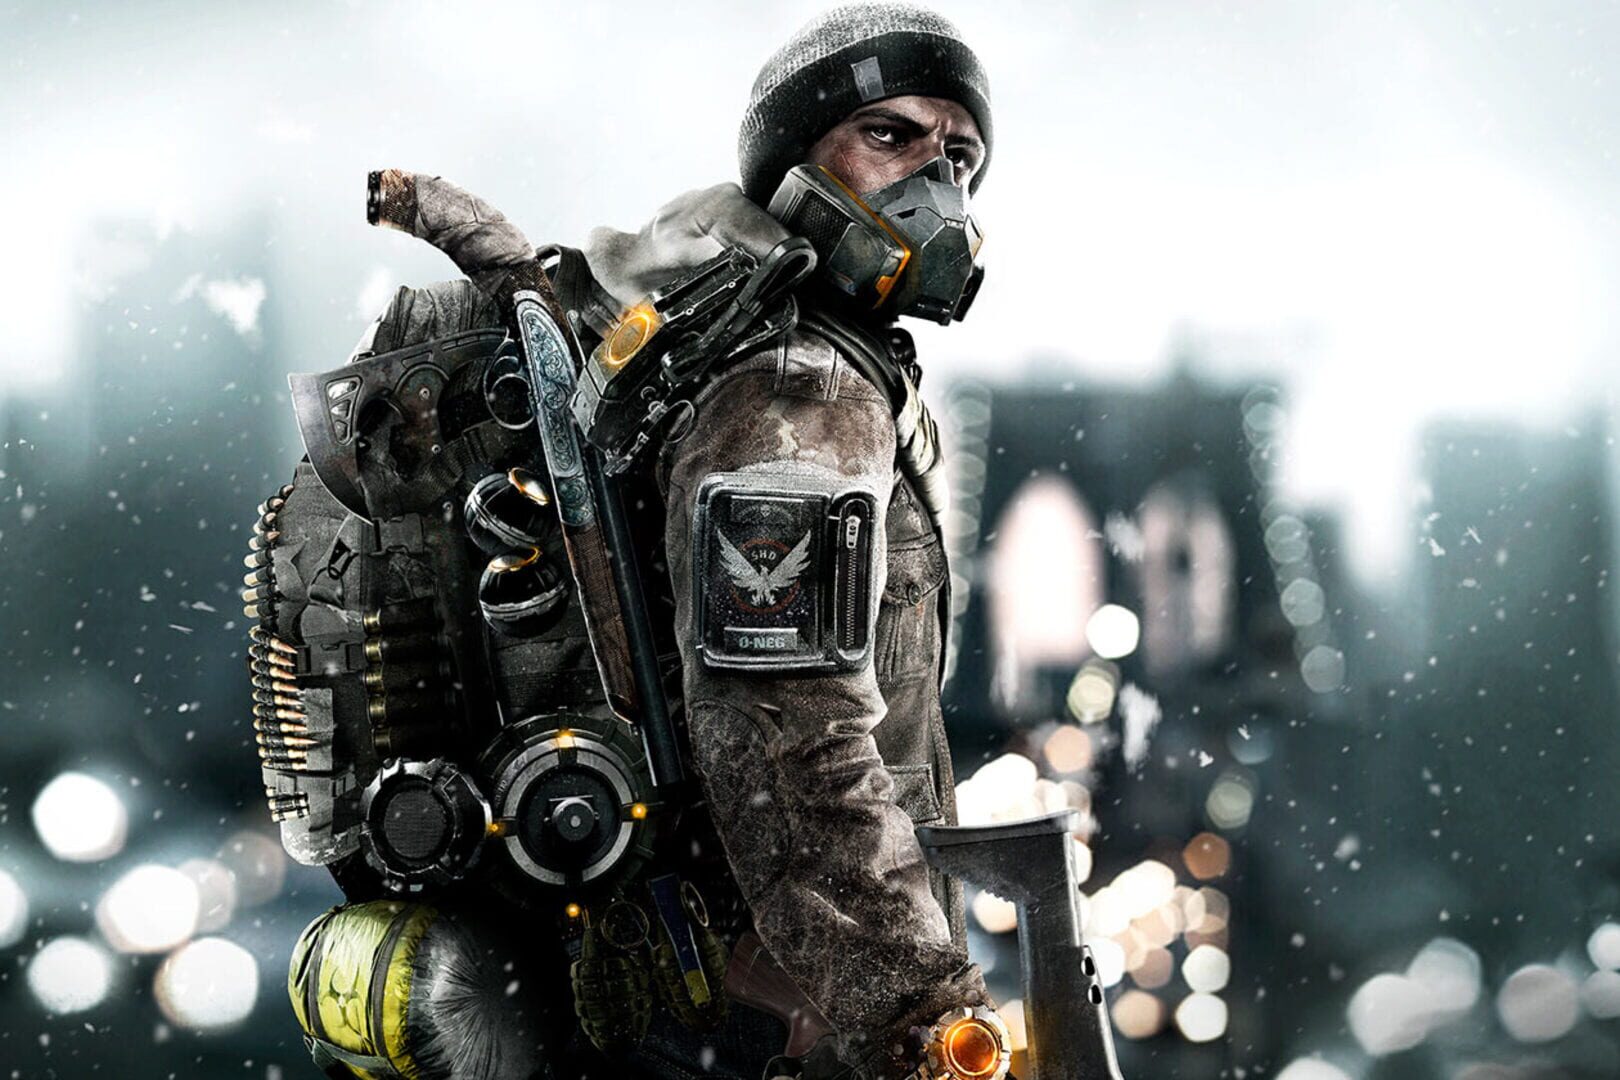 Tom Clancy's The Division Image